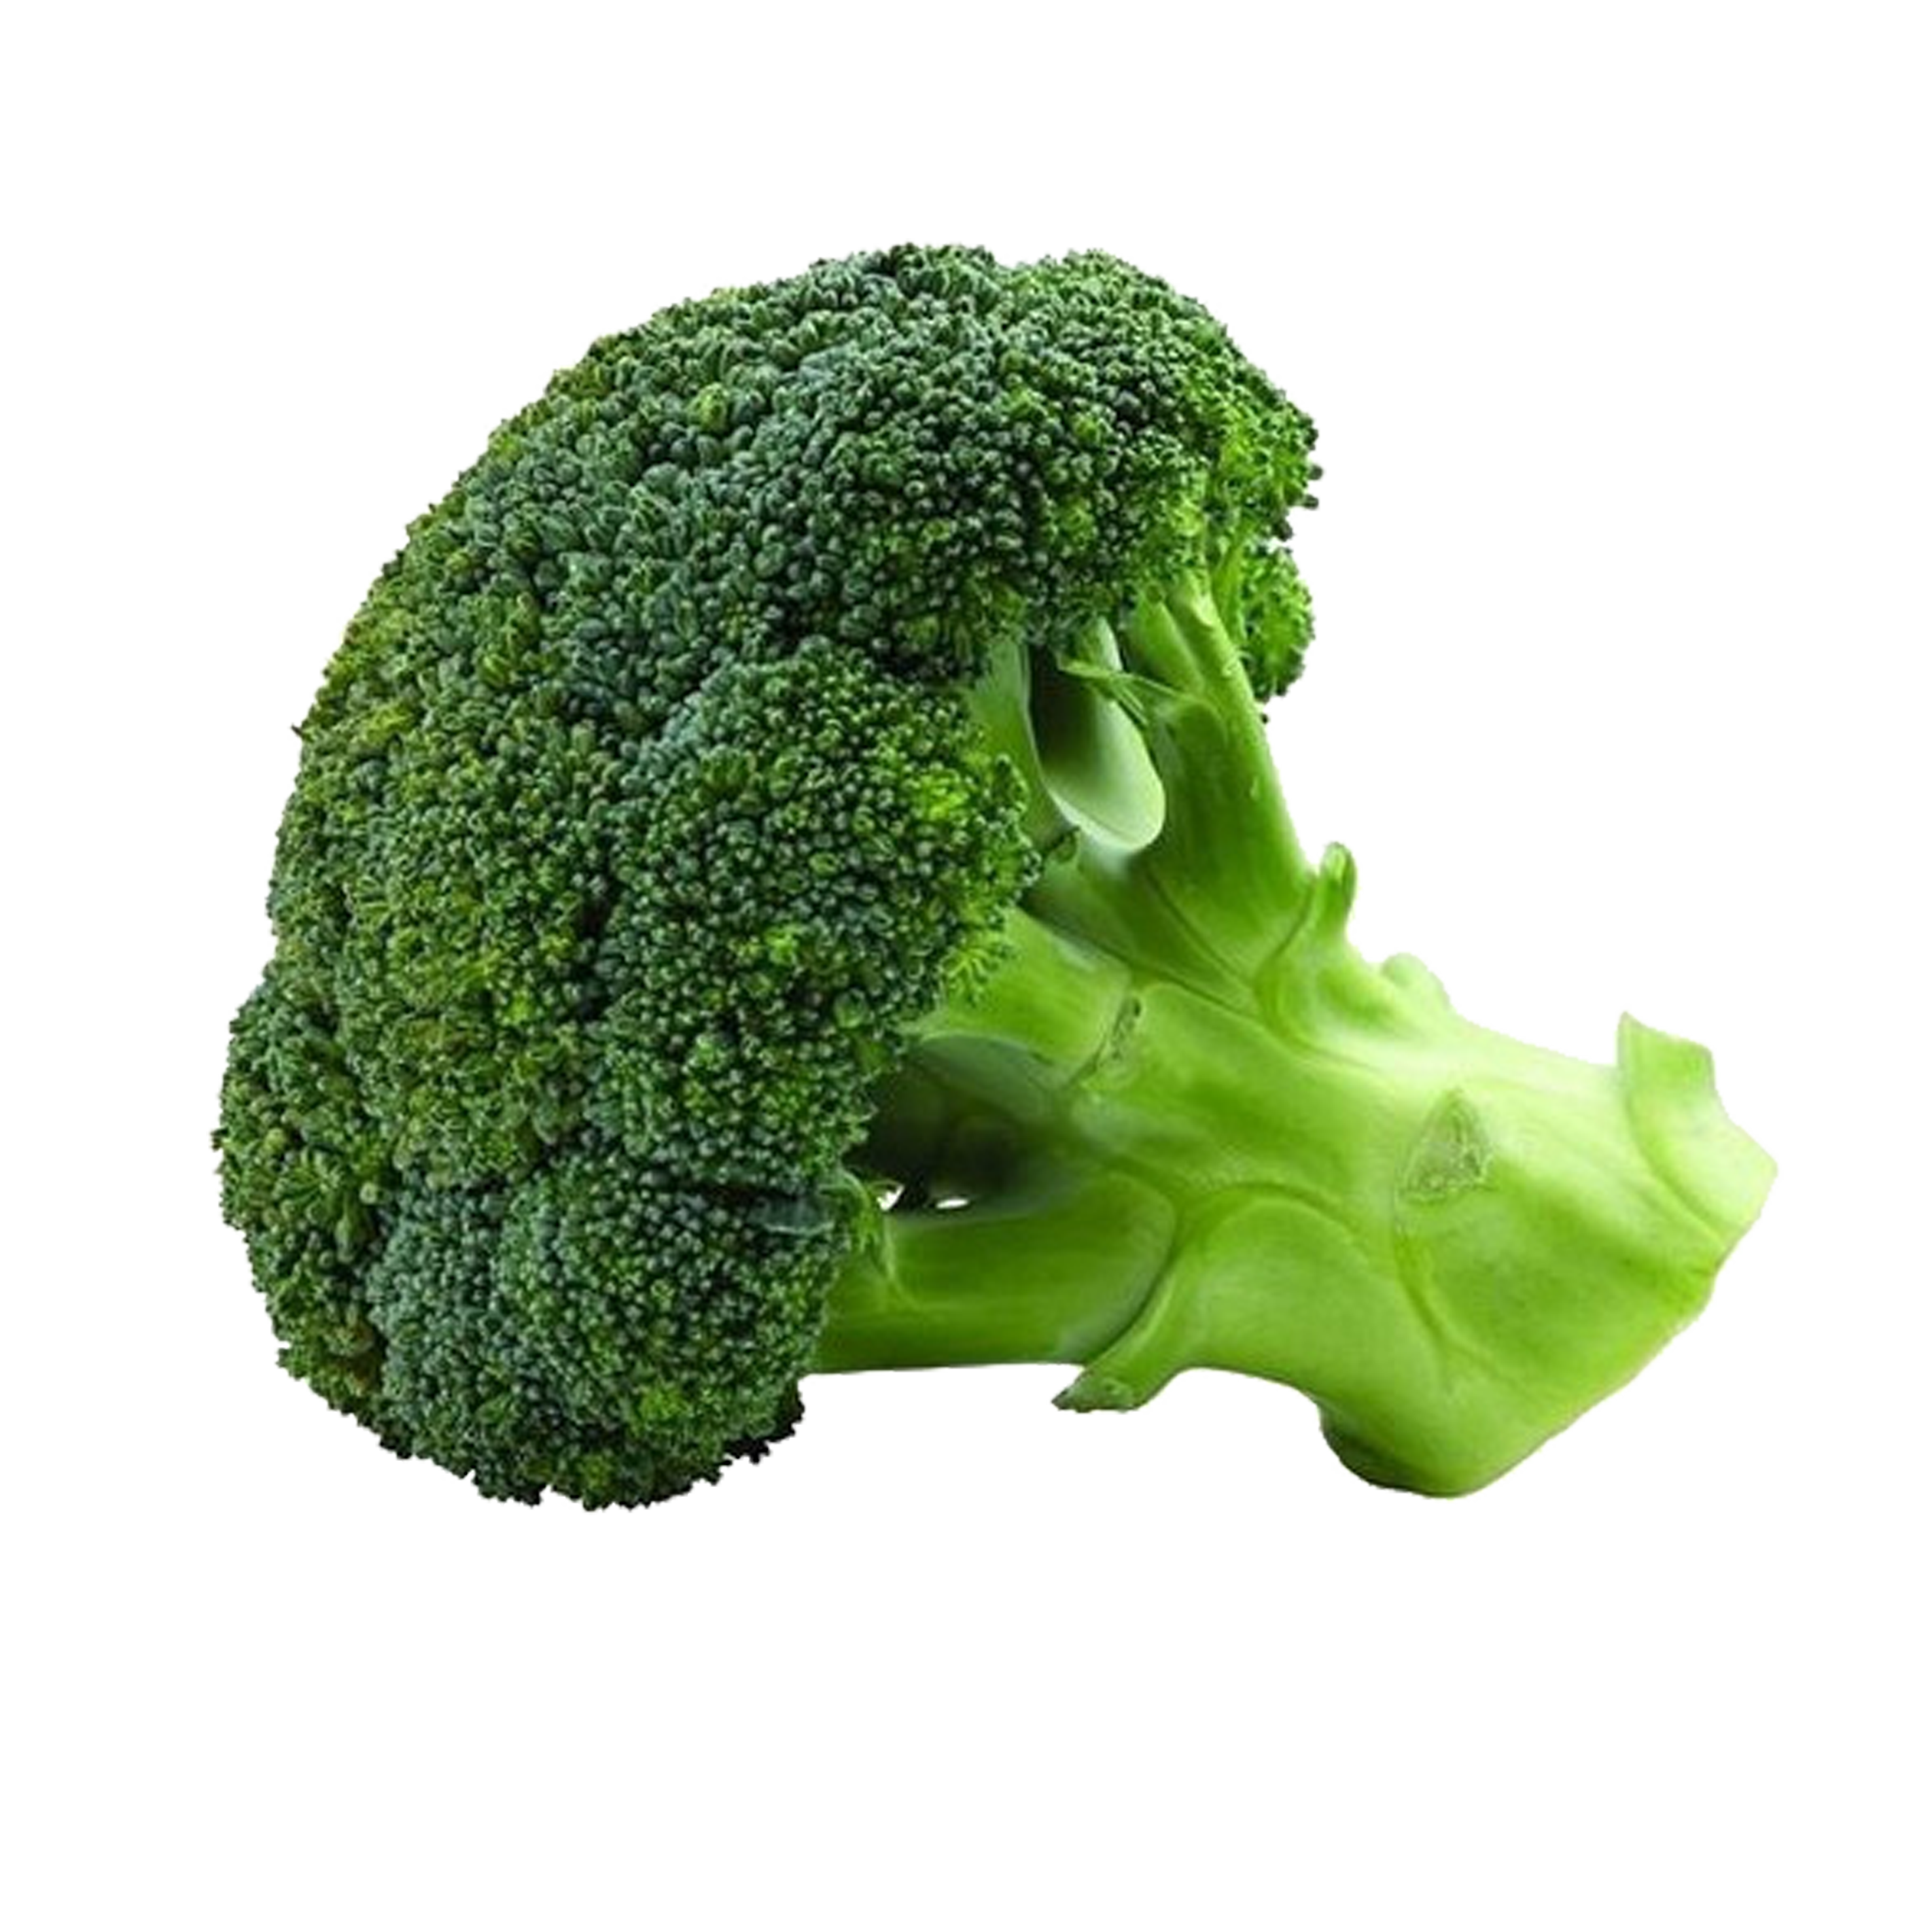 Chinese Broccoli PNG HD Images pngteam.com